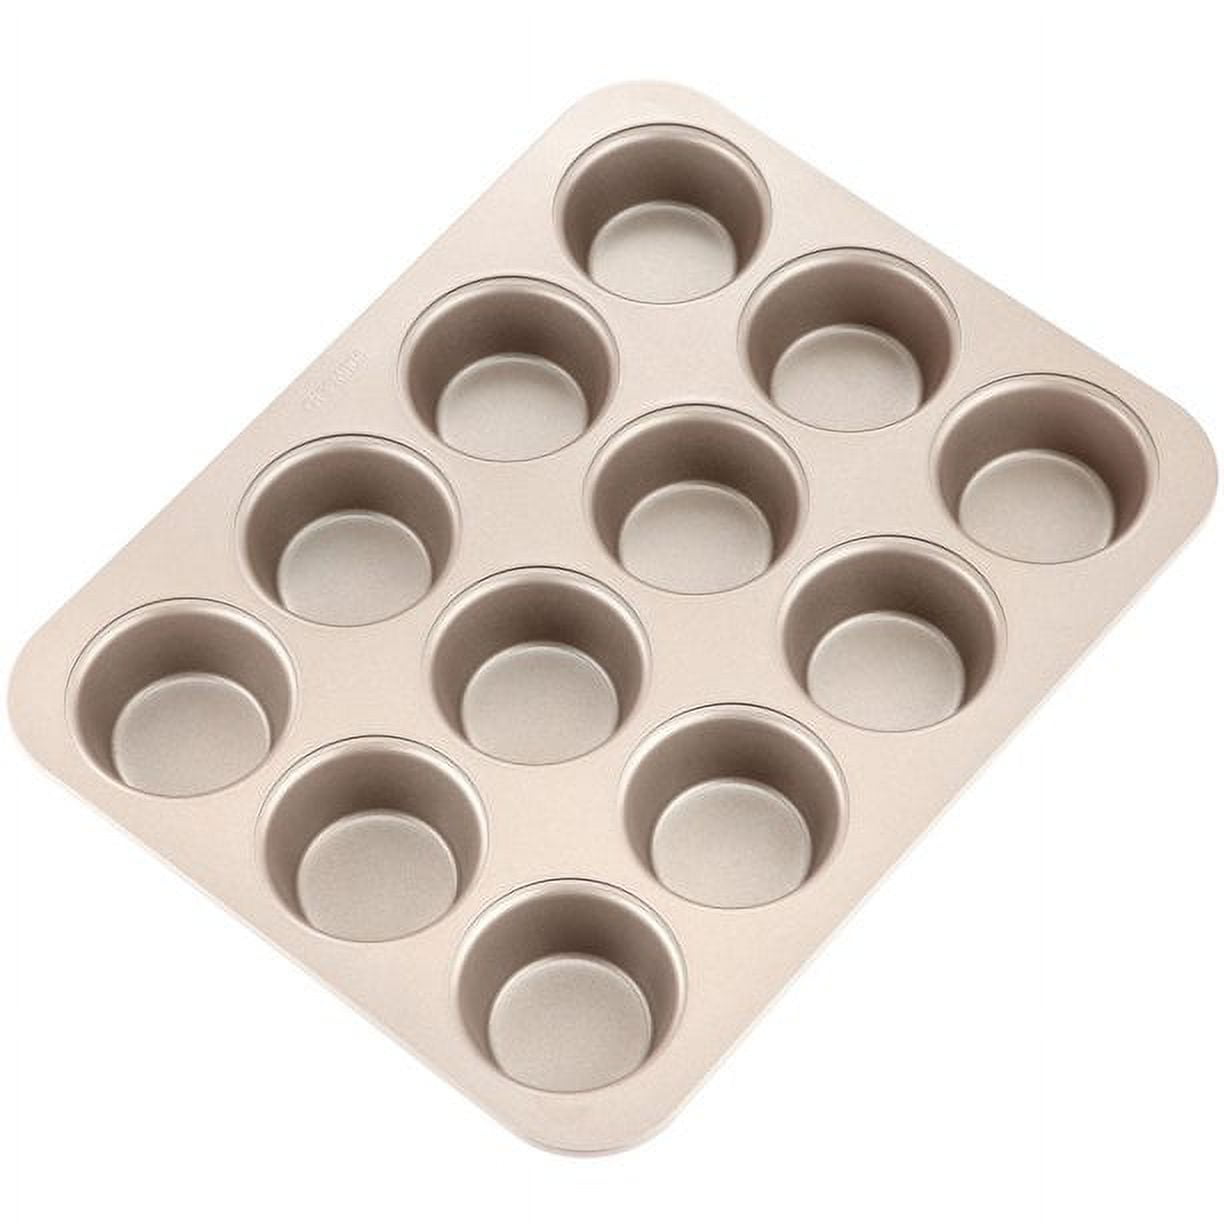 Mini Financier Cake Pan Rectangle 8 Well - CHEFMADE official store